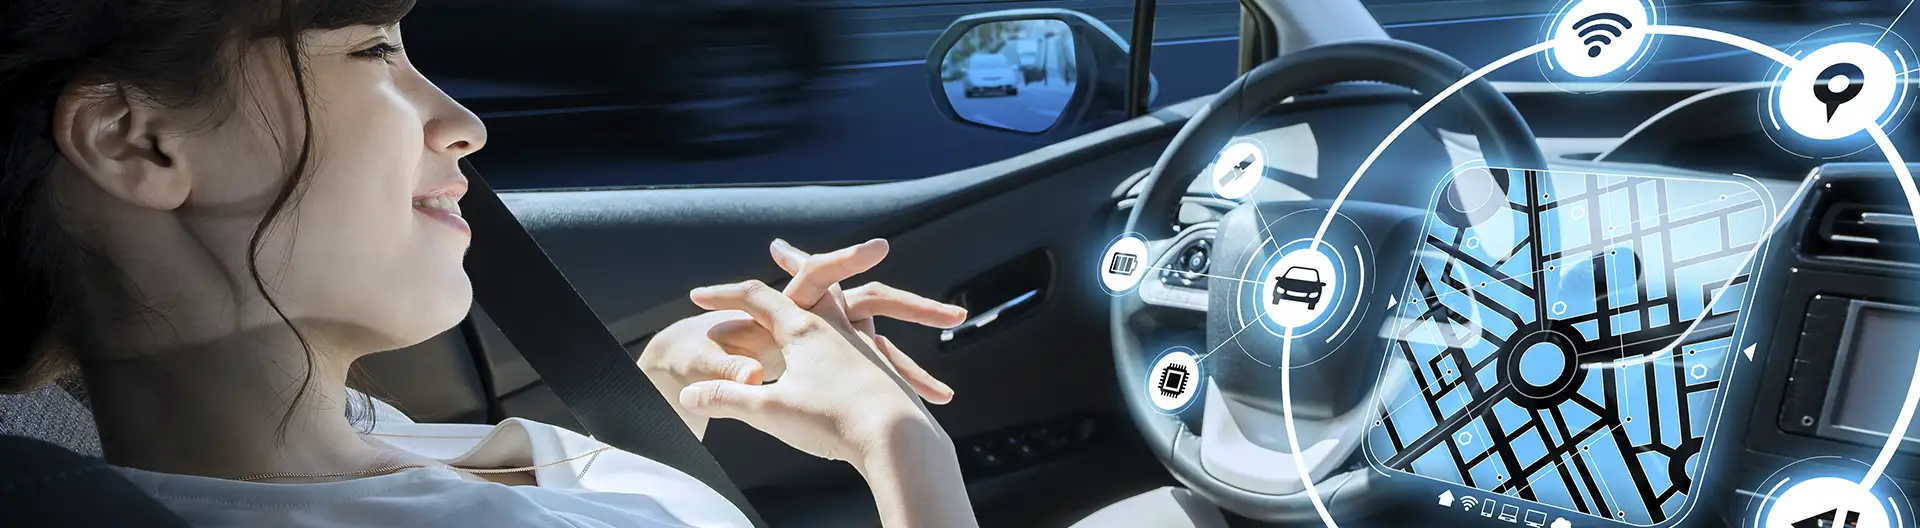 How to Ensure Automotive Cybersecurity in the Next-Gen Vehicles [Part 1] - Banner